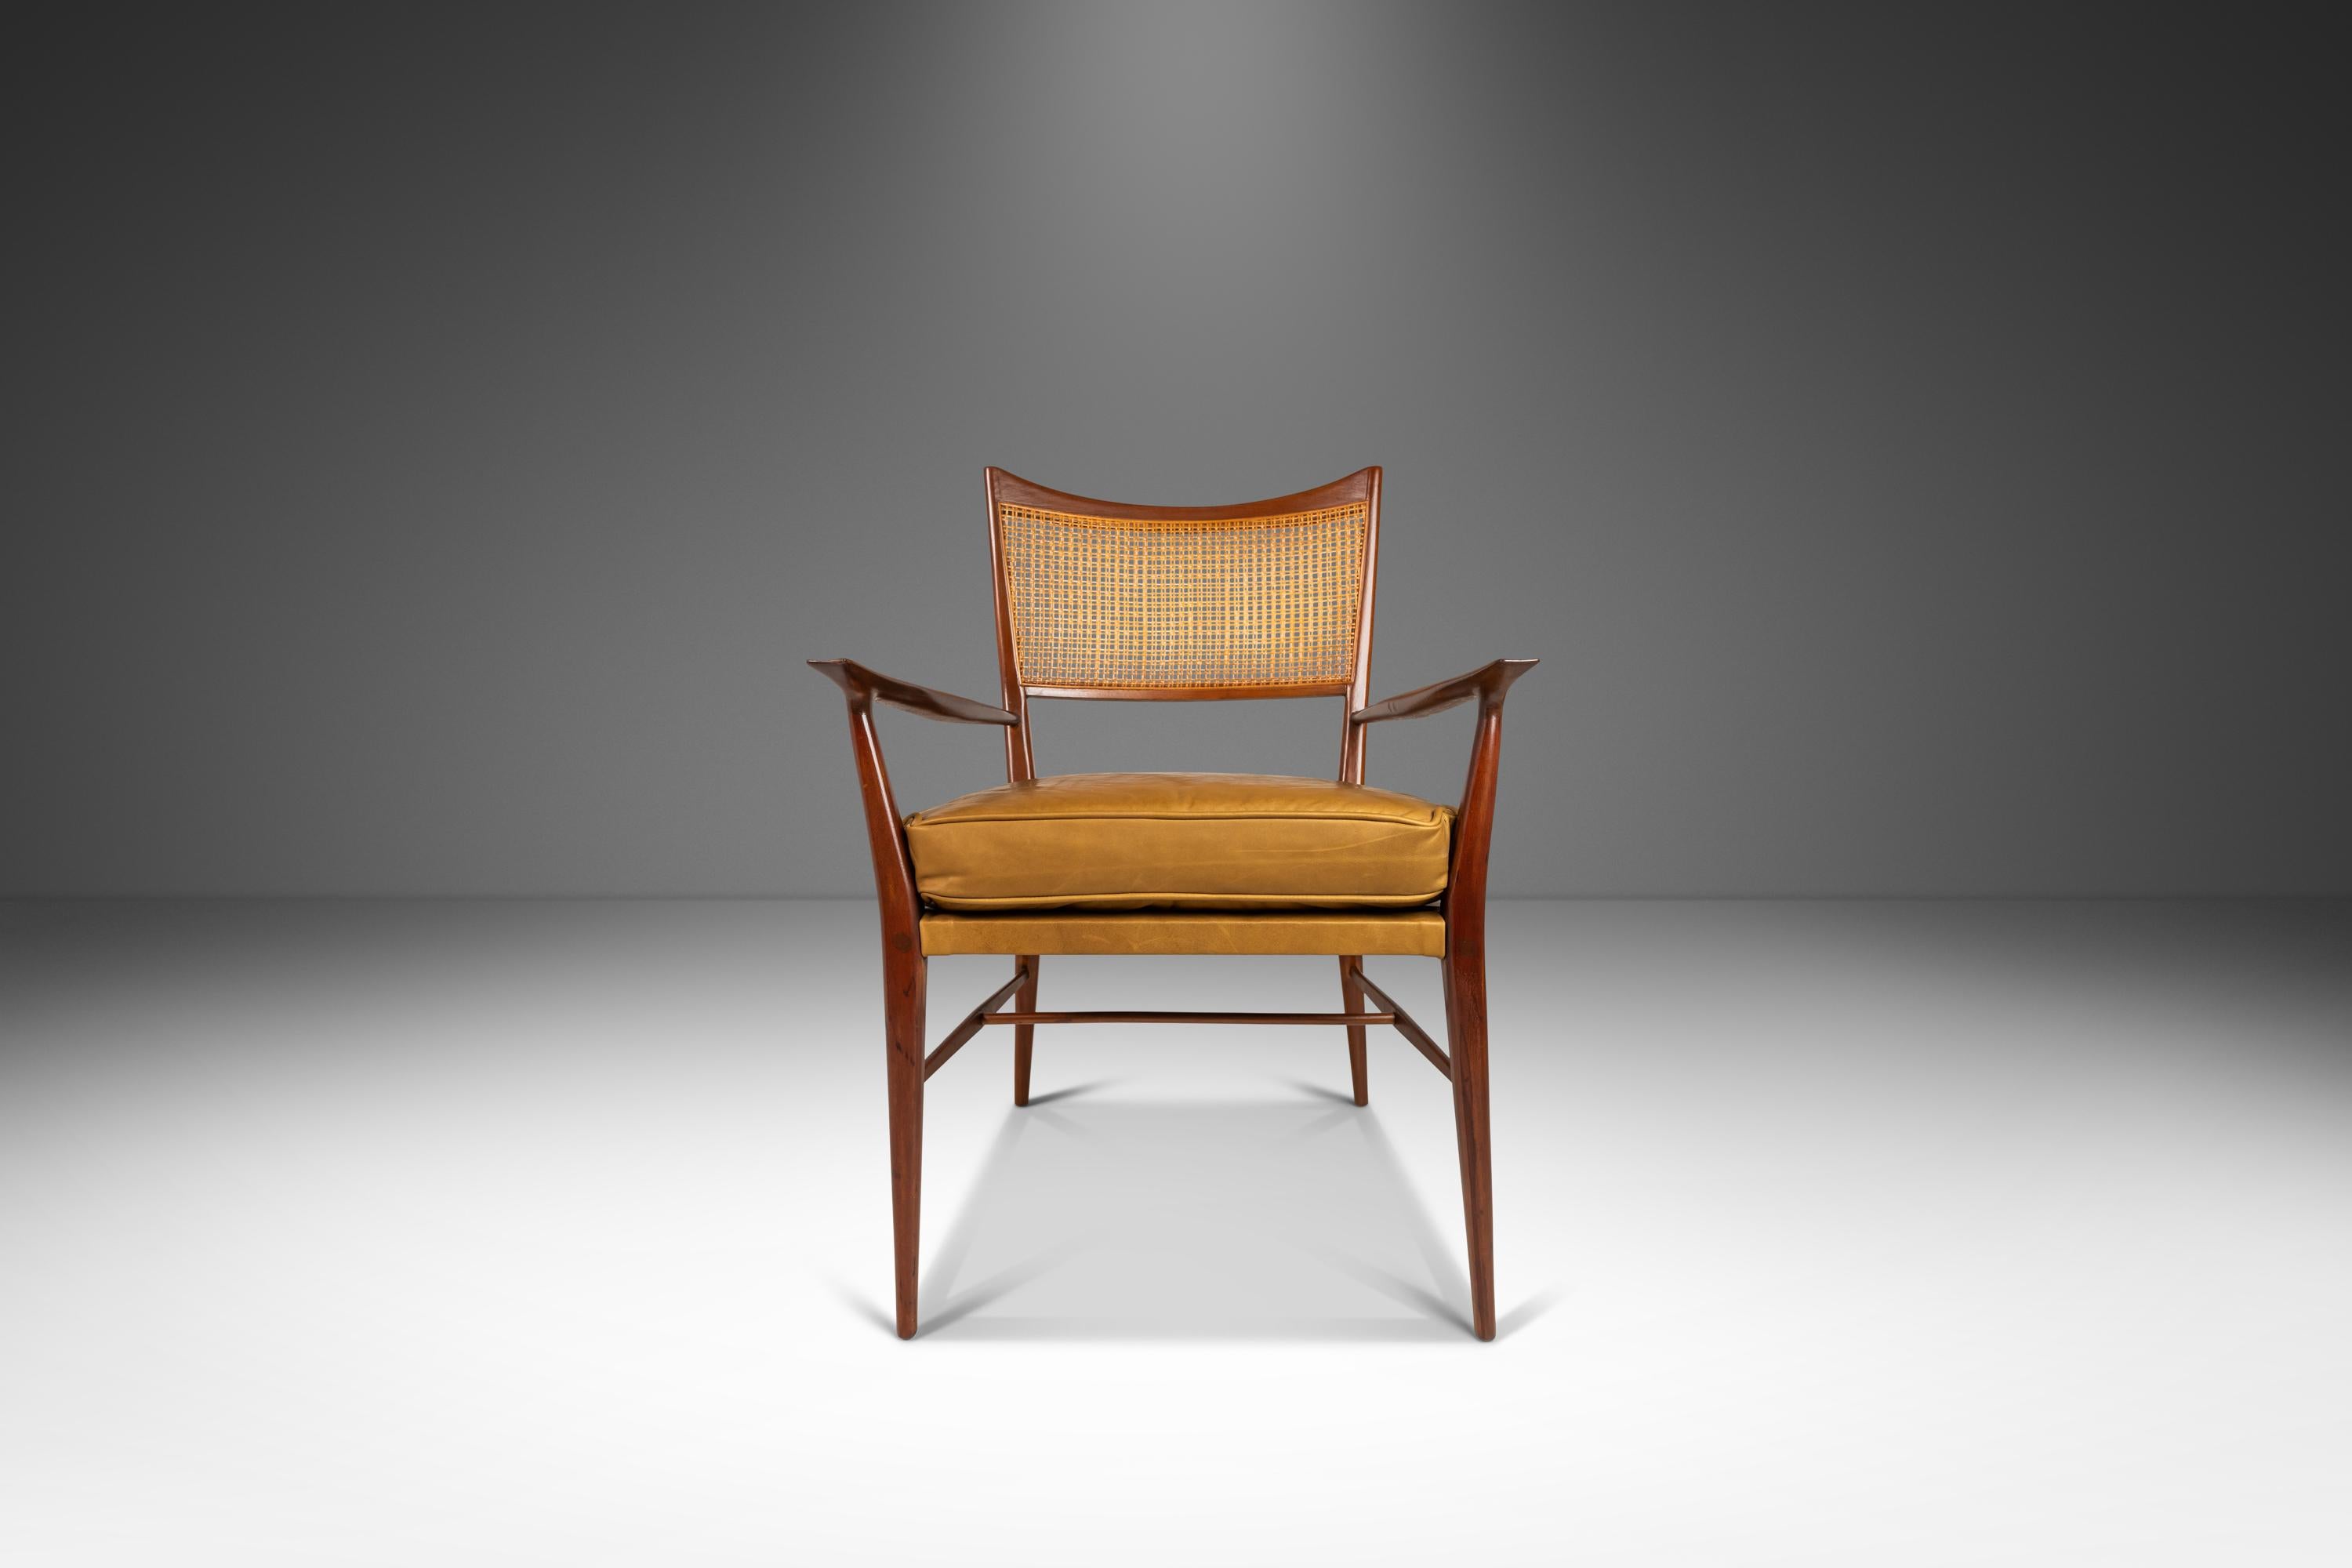 Introducing a one-of-a-kind, luxury piece of authentic twentieth century furniture - a rare model 7009 armchair designed by Paul McCobb for Directional Furniture. This chair is truly a work of art and a must-have for any collector of mid-century